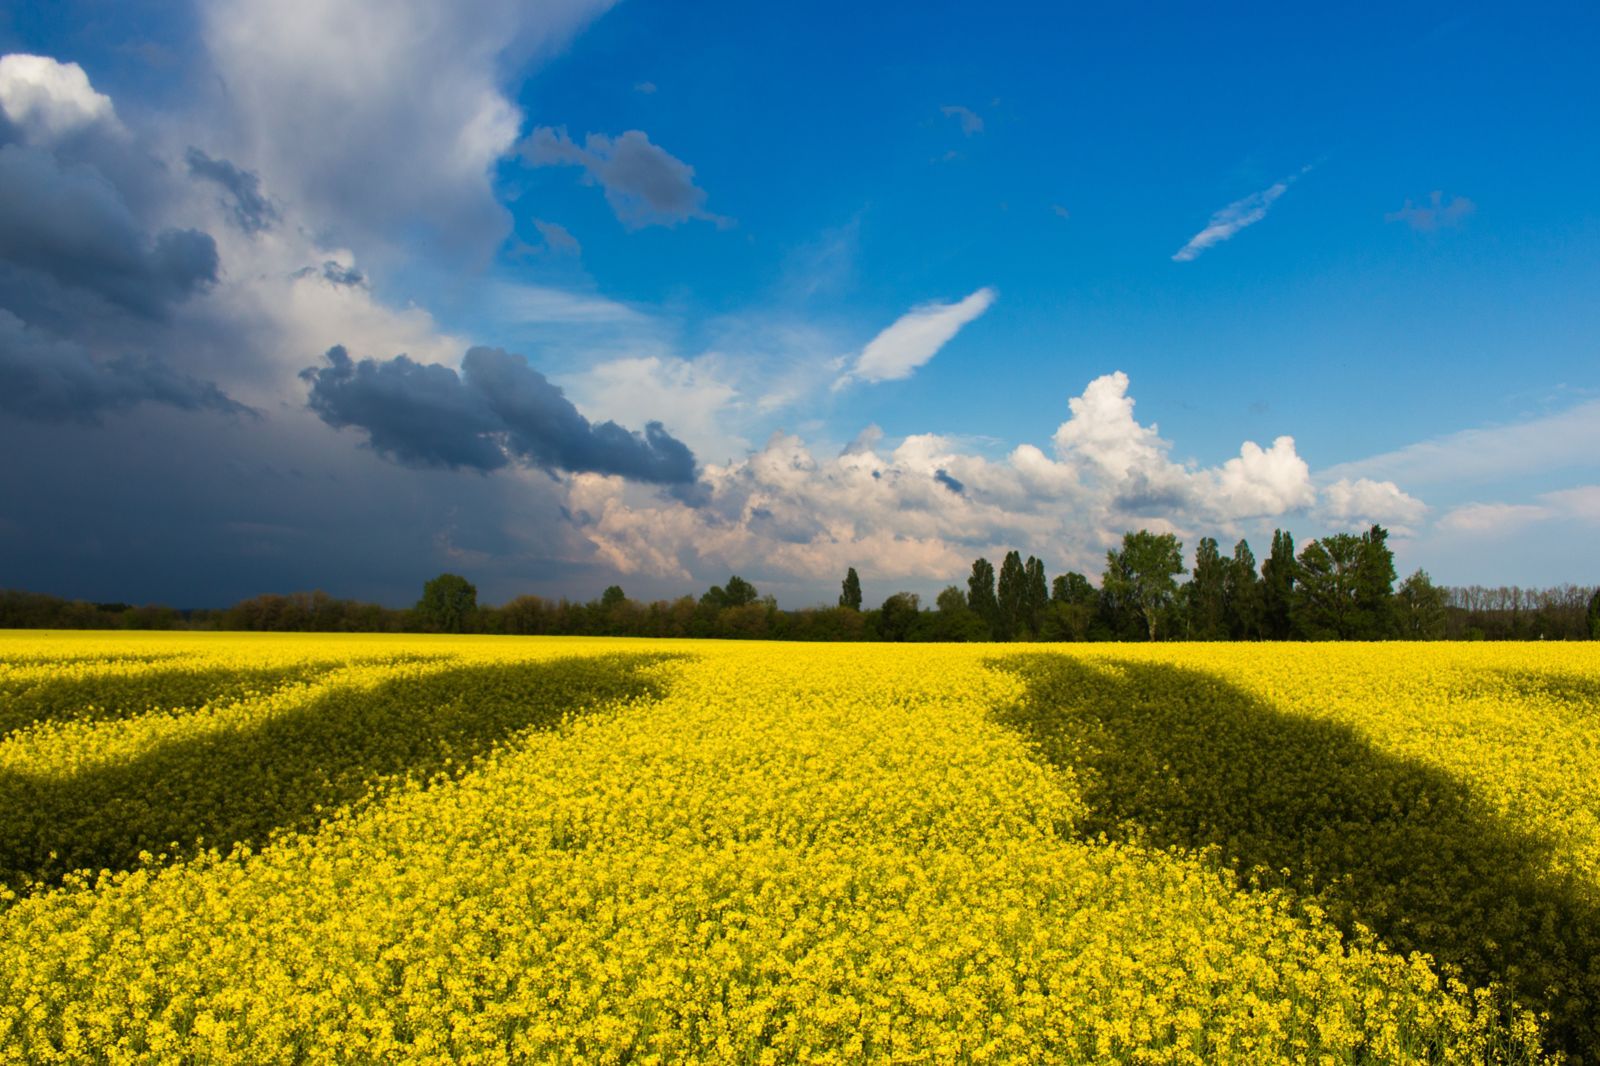 1600x1066 Outdoors Landscape Trees Clouds Flowers Summer Field Sun Countryside Farm Agriculture Yellow Rural Wallpaper Best High Quality Wallpaper